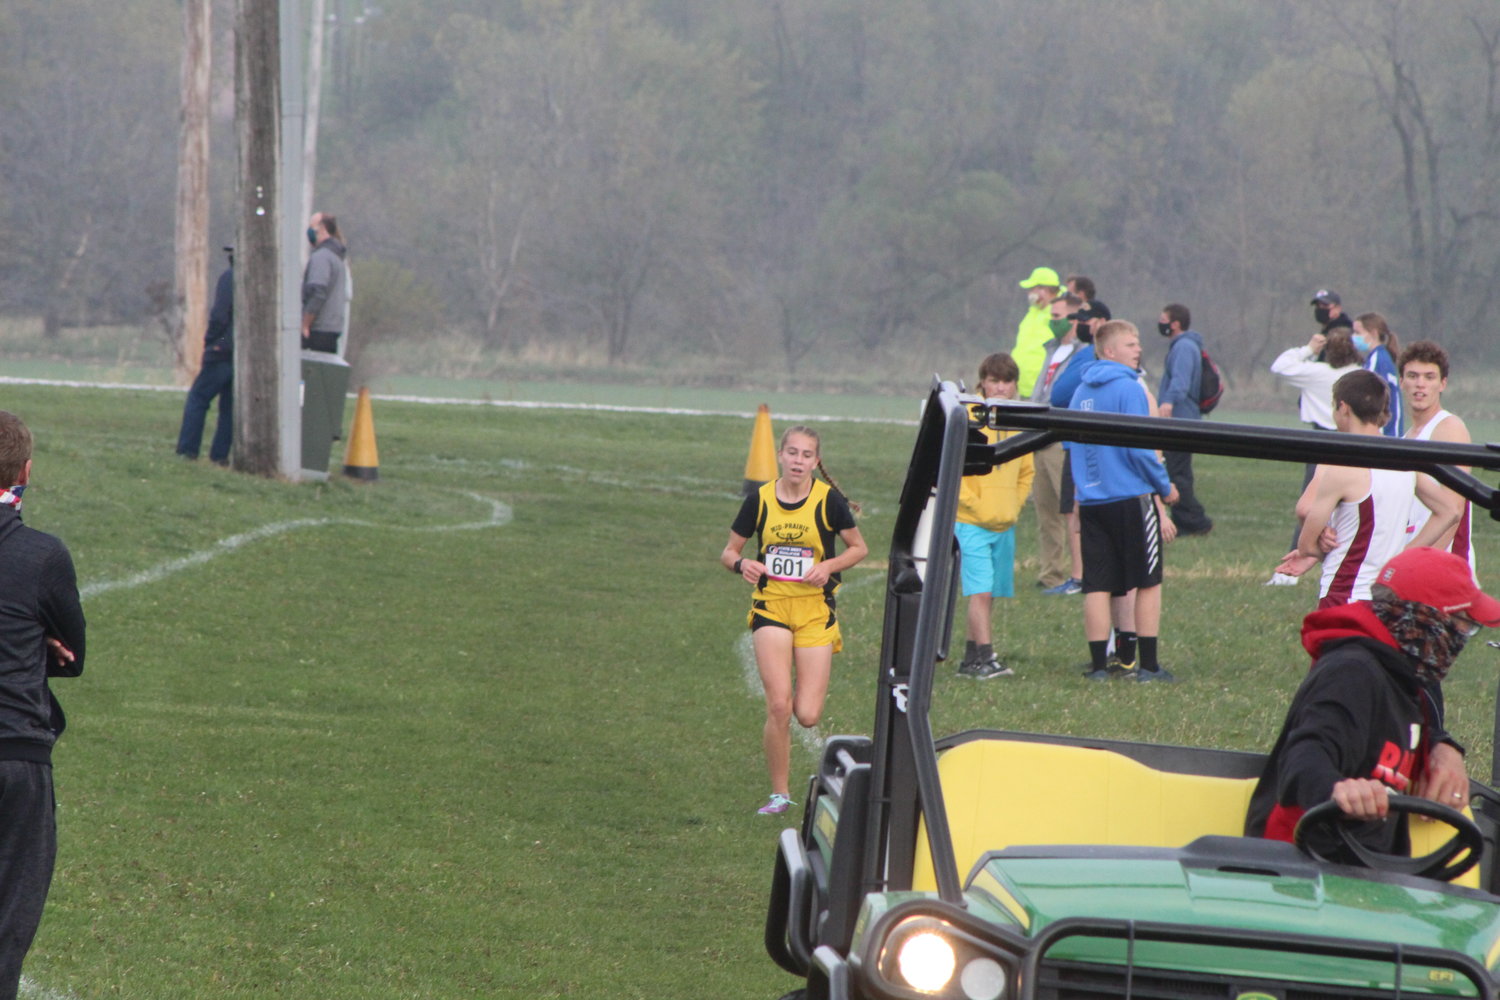 Unbeaten in every race this season, Mid-Prairie freshman Danielle Hostetler has spent most of her season running behind the lead pace vehicle with the second-place runner nowhere in sight.